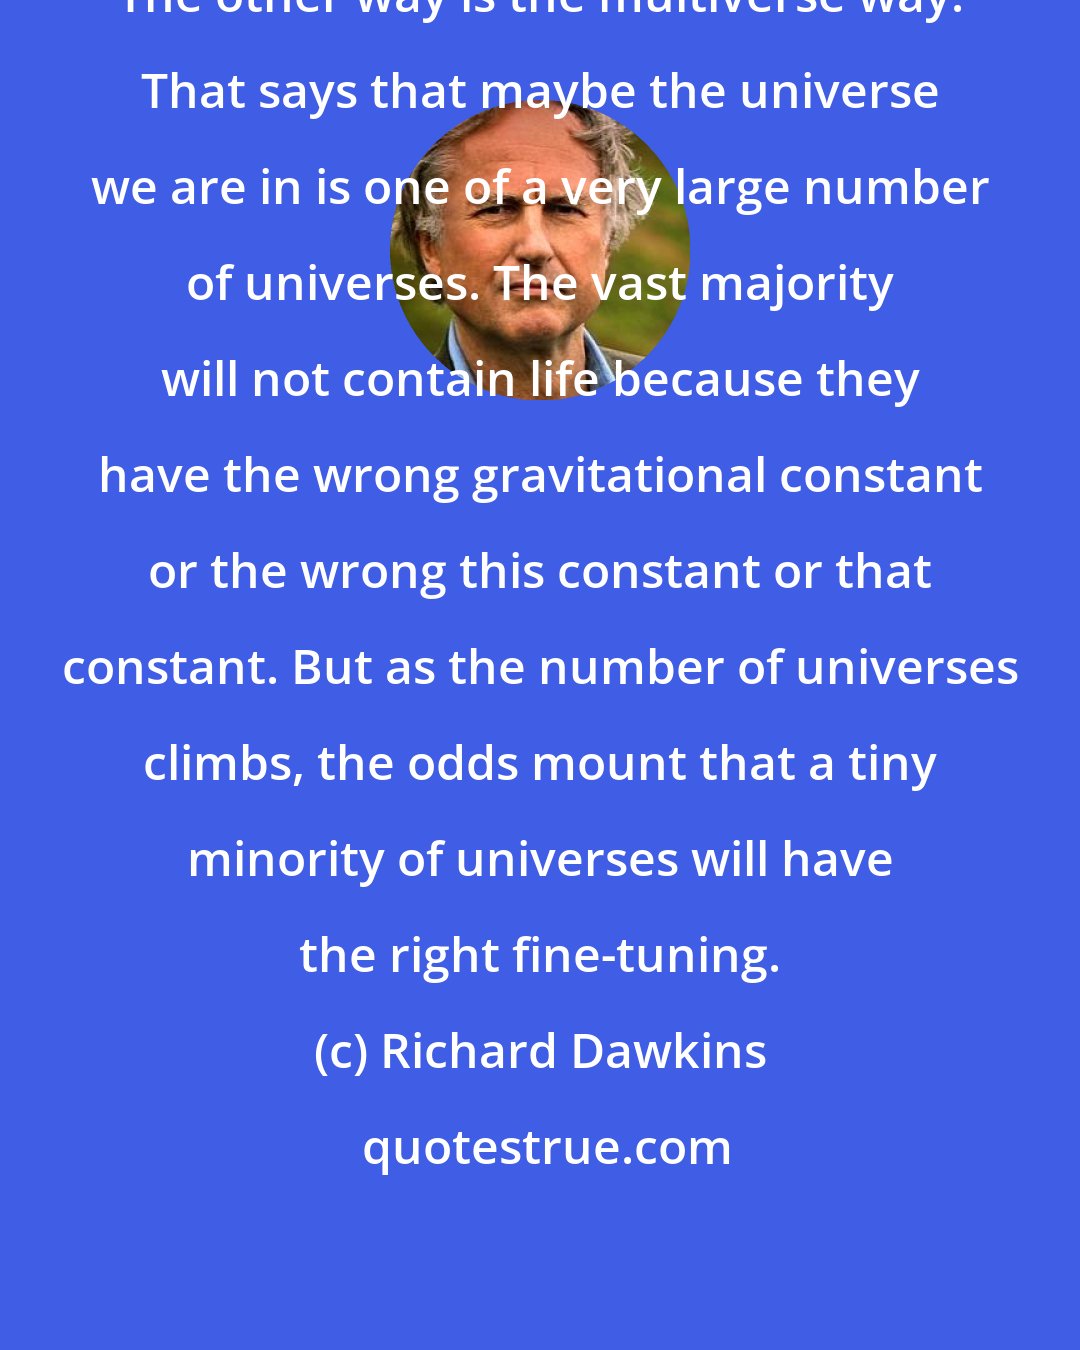 Richard Dawkins: The other way is the multiverse way. That says that maybe the universe we are in is one of a very large number of universes. The vast majority will not contain life because they have the wrong gravitational constant or the wrong this constant or that constant. But as the number of universes climbs, the odds mount that a tiny minority of universes will have the right fine-tuning.